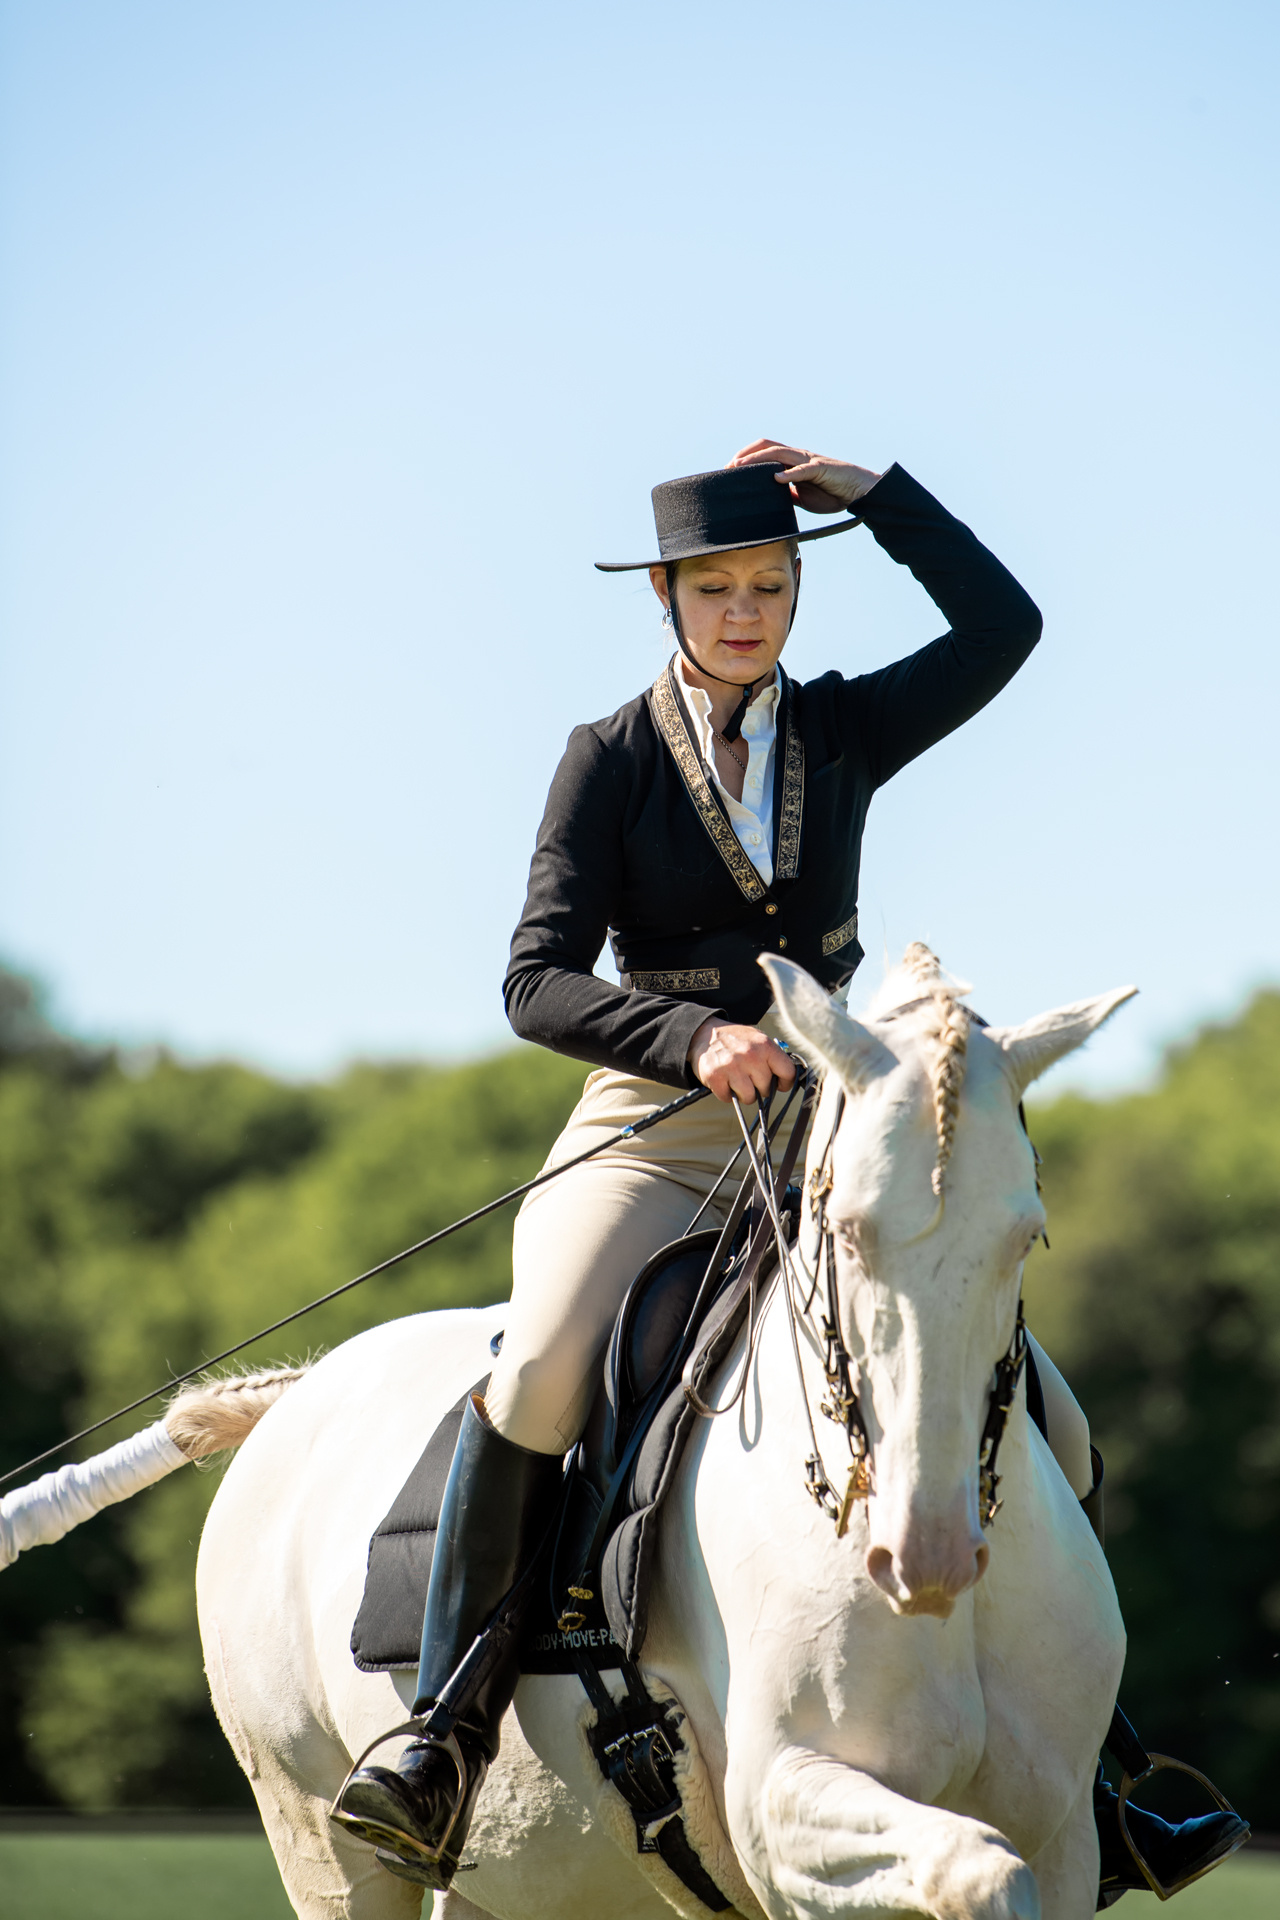 Equitation: Recreational saddle seat activity performed by a female rider, Equestrian sport. 1280x1920 HD Background.